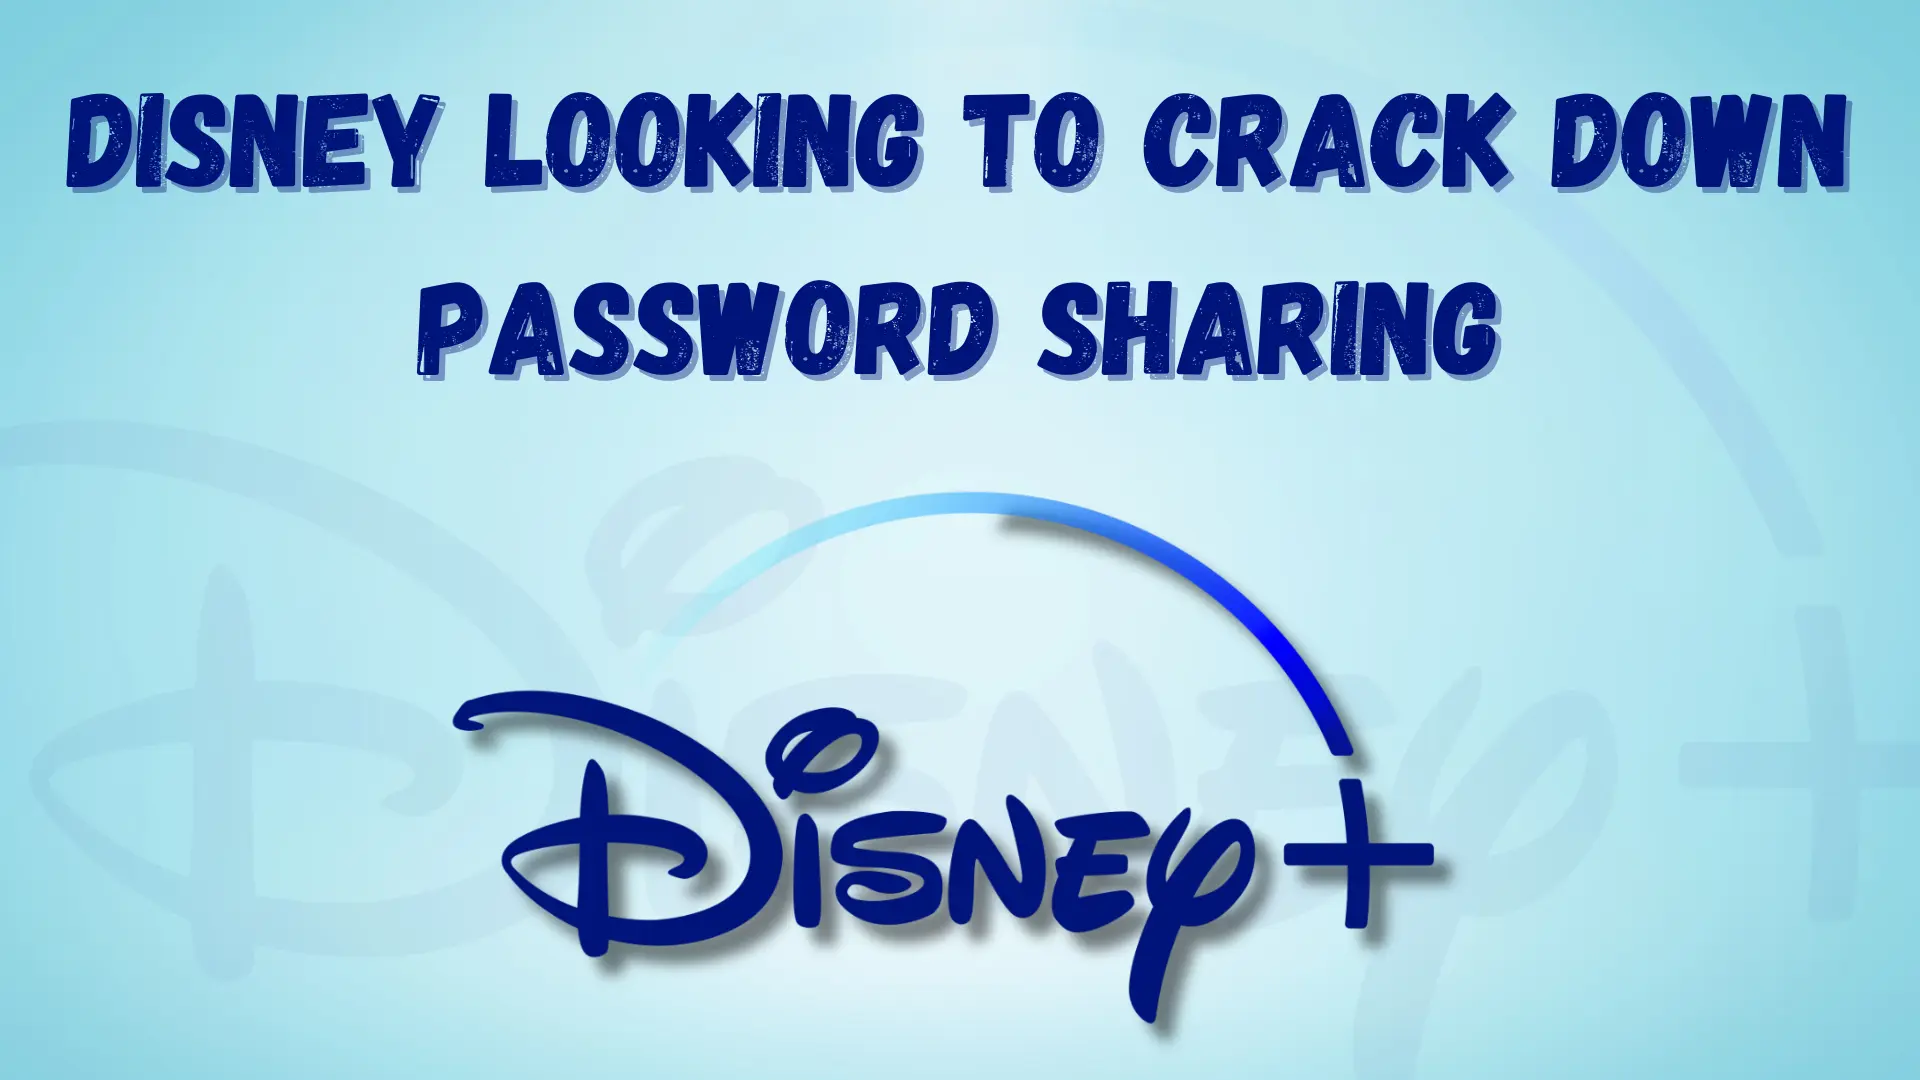 Disney Looking to Crack Down Password Sharing